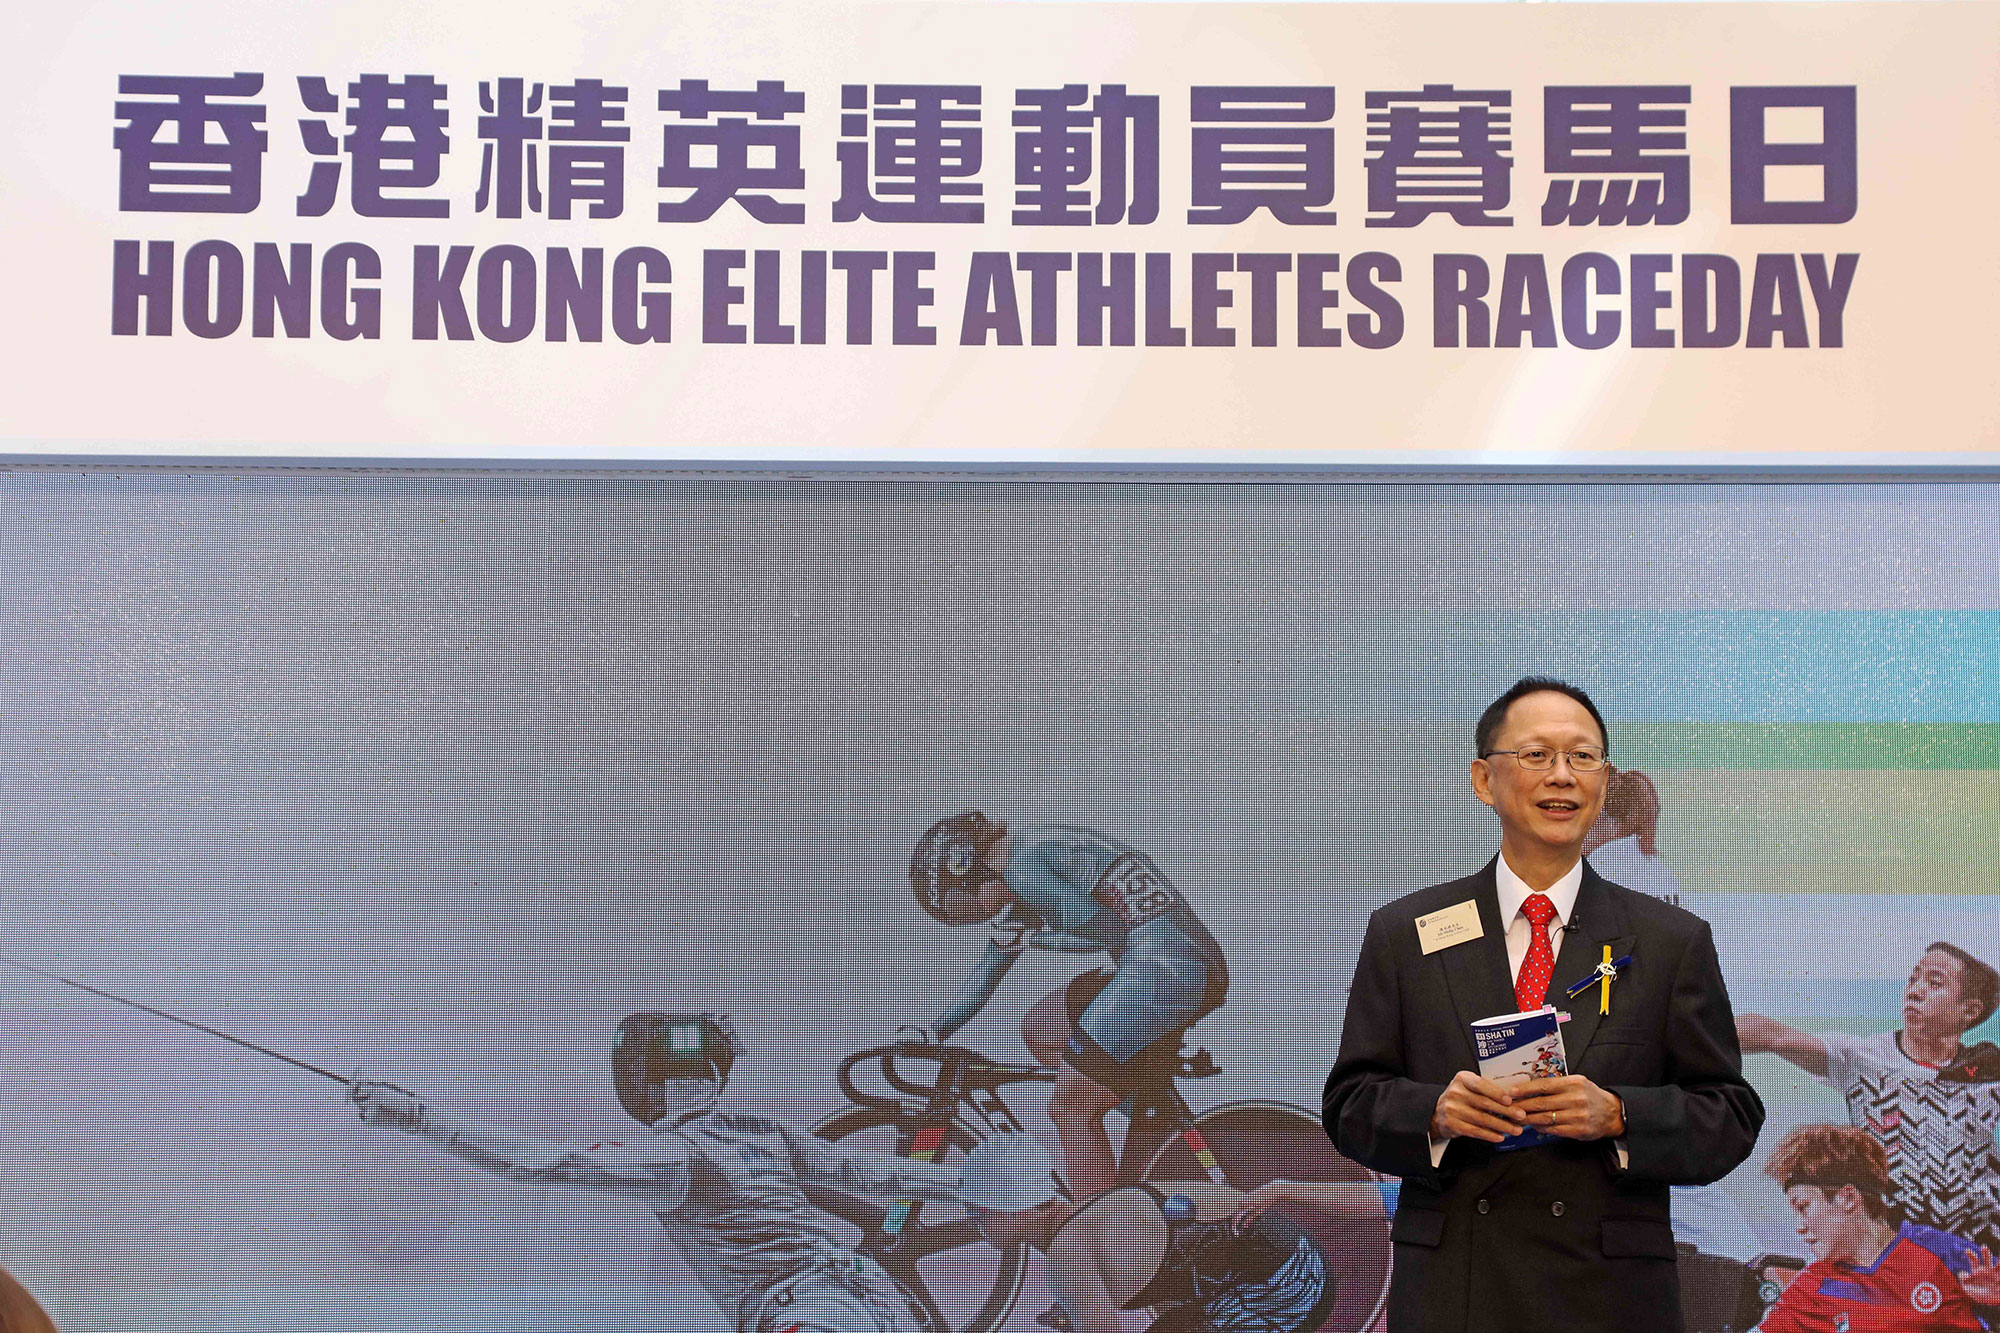 Club Chairman Philip Chen said participation in sports can bring both tangible and intangible benefits to individuals as well as to society as a whole.